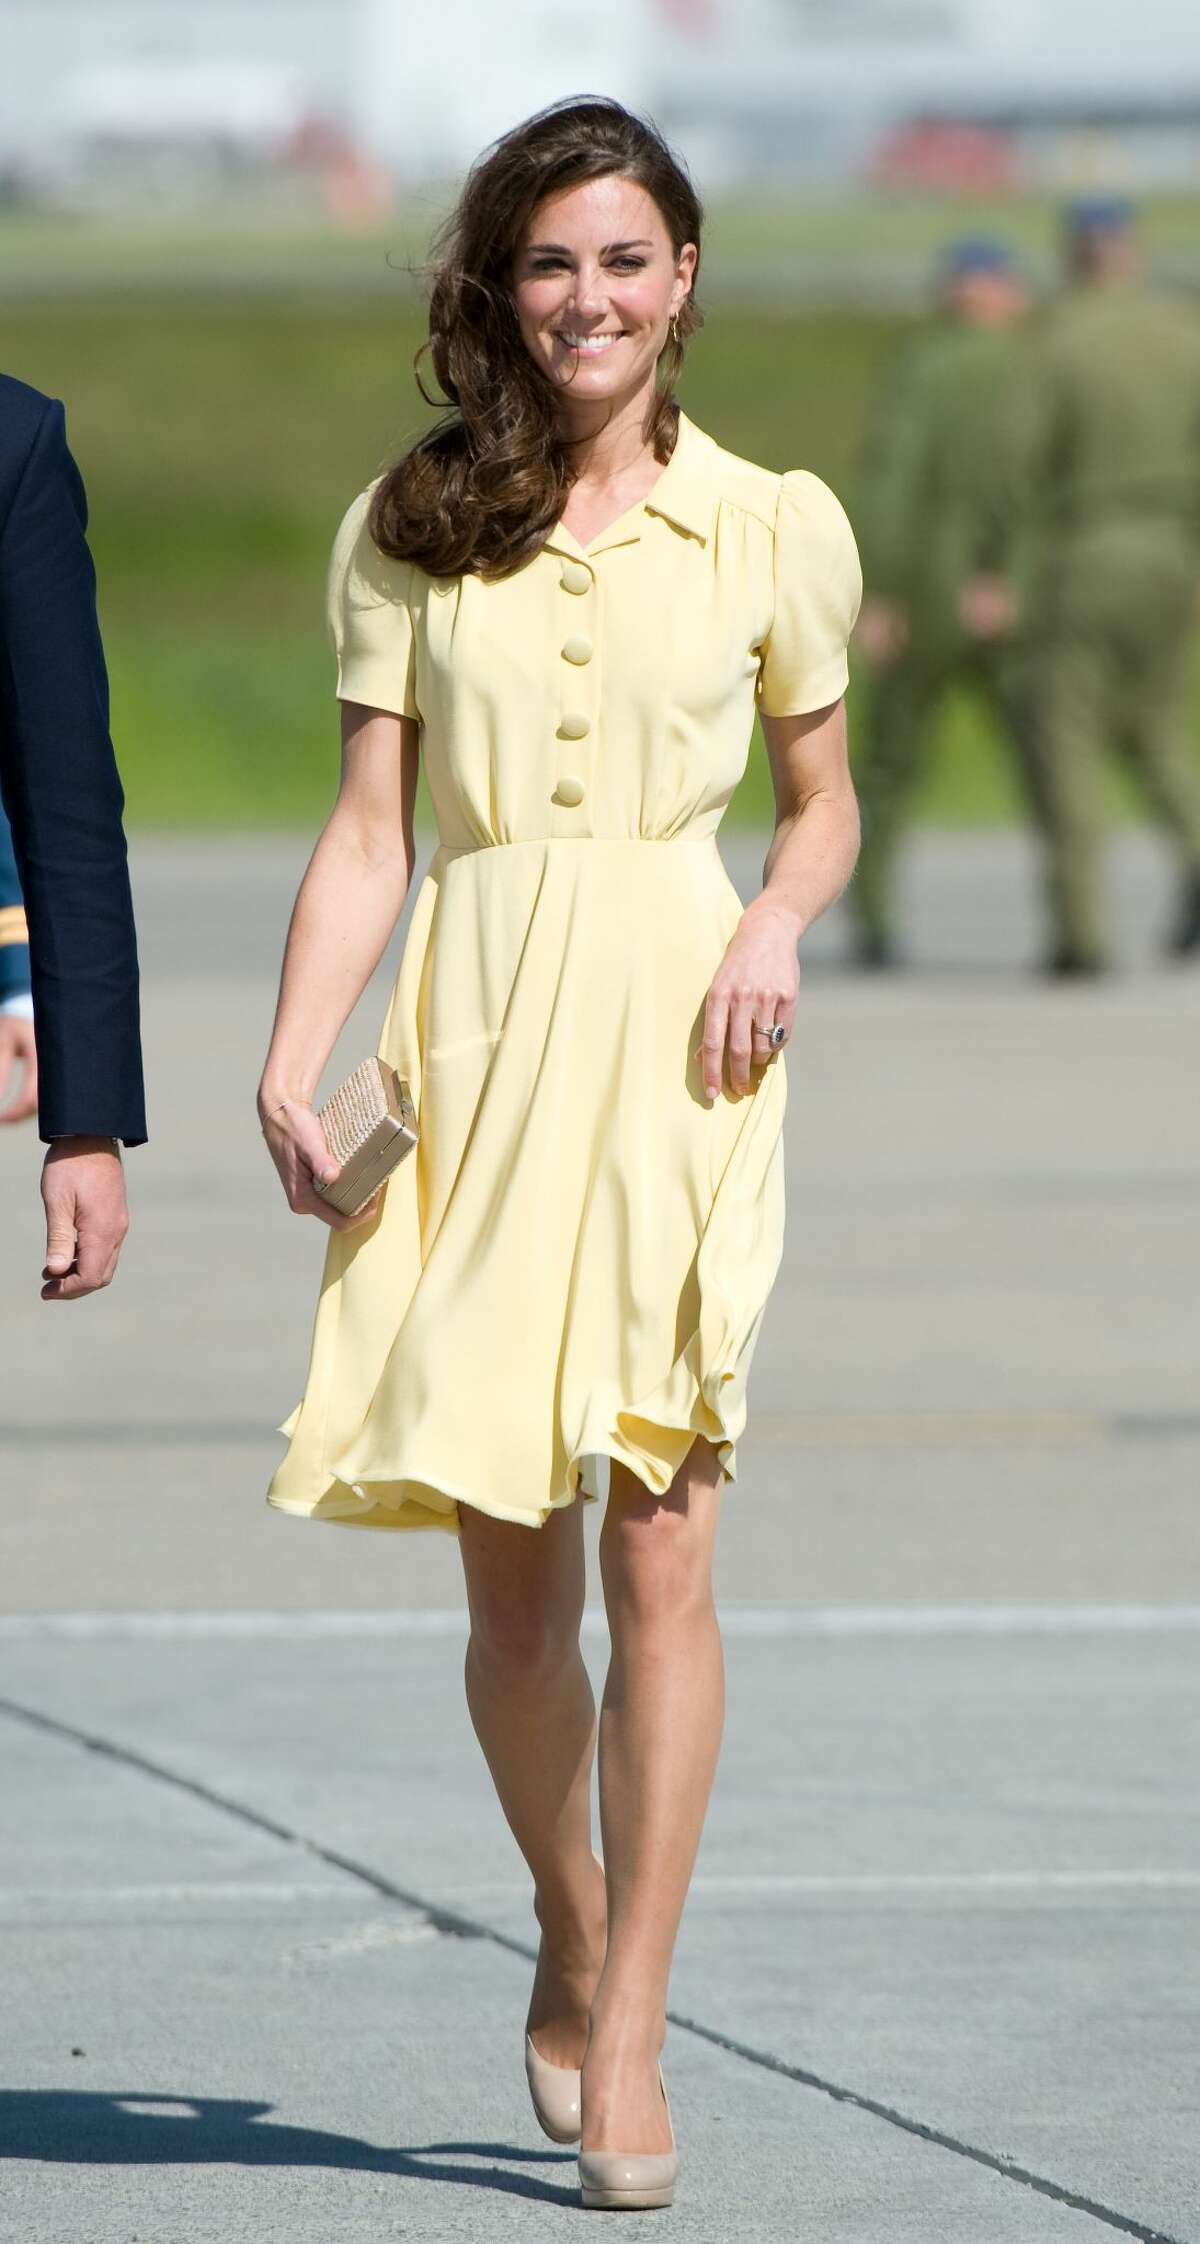 Kate Middleton's best summer look to inspire you Pastels of any kind and collars are all the rage right now. Plus look how chic and comfy she looks!